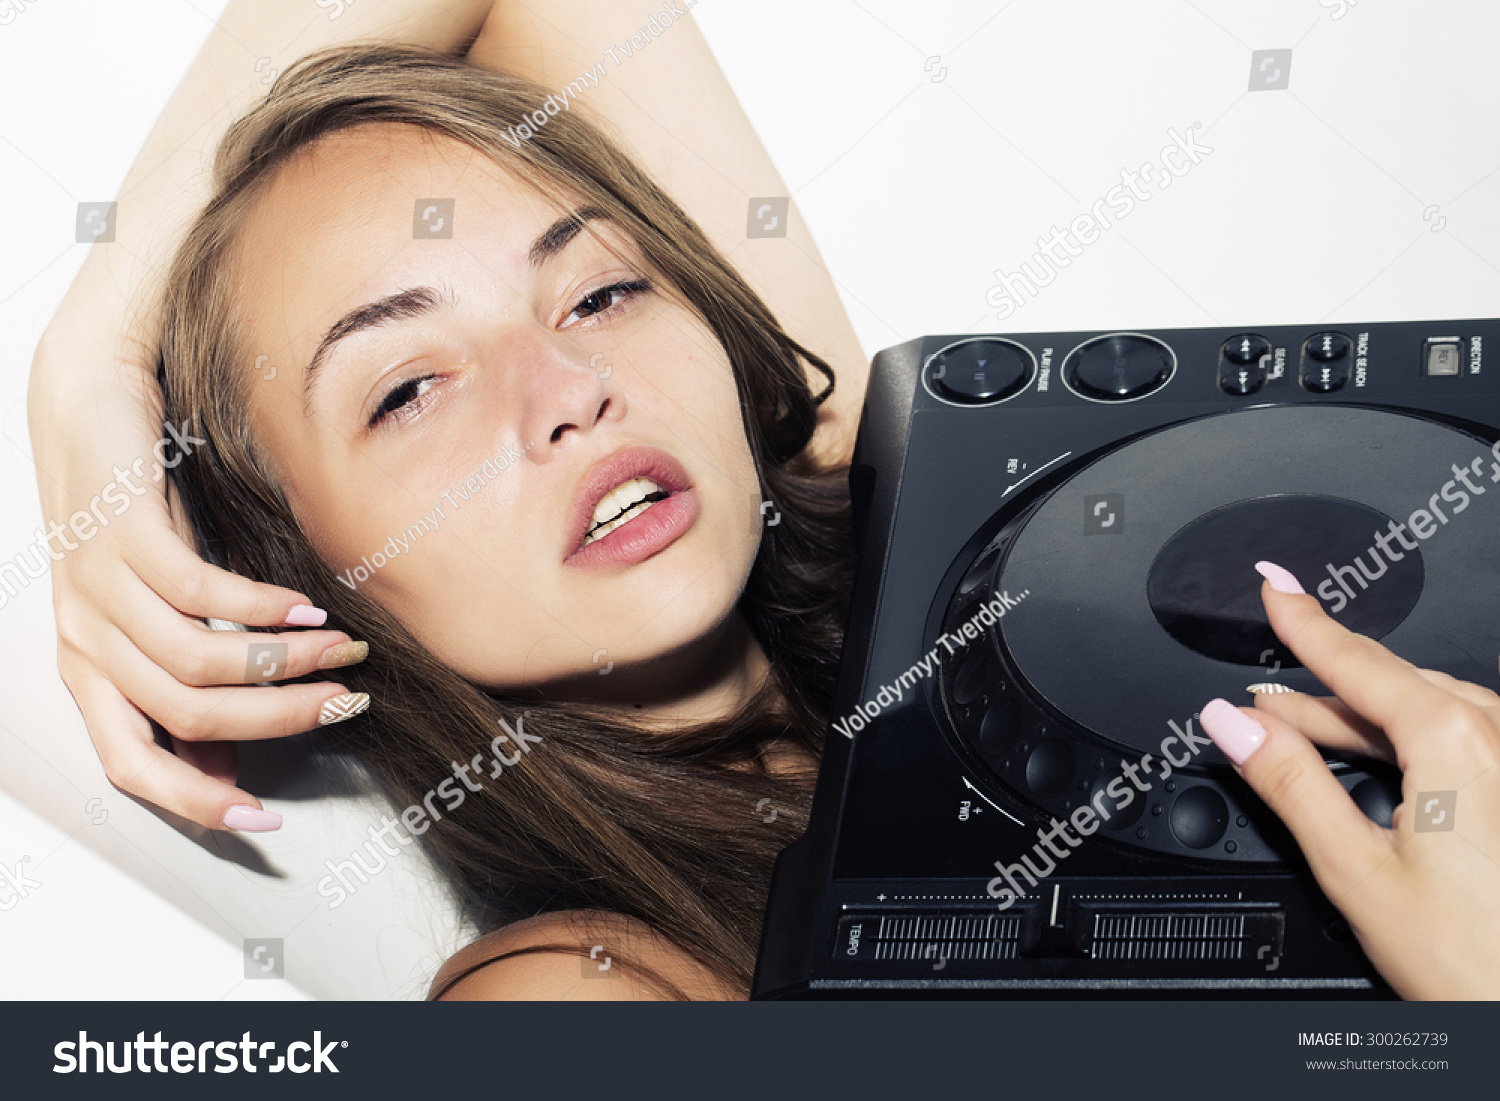 Pretty Dj Woman With Violin Stock Photo - Image of party 